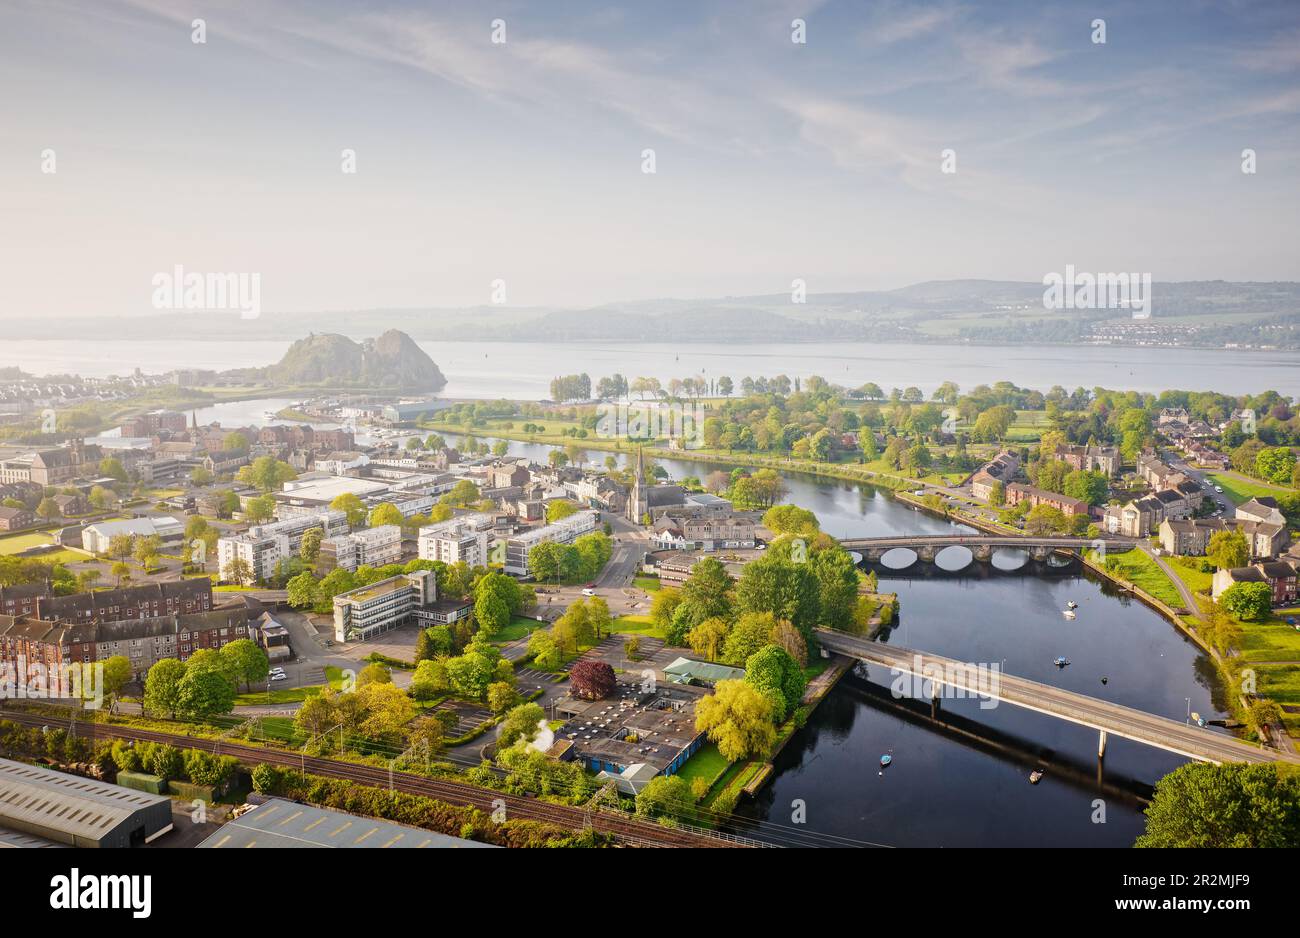 Dumbarton town aerial view with the River Leven and Dumbarton rock castle Stock Photo